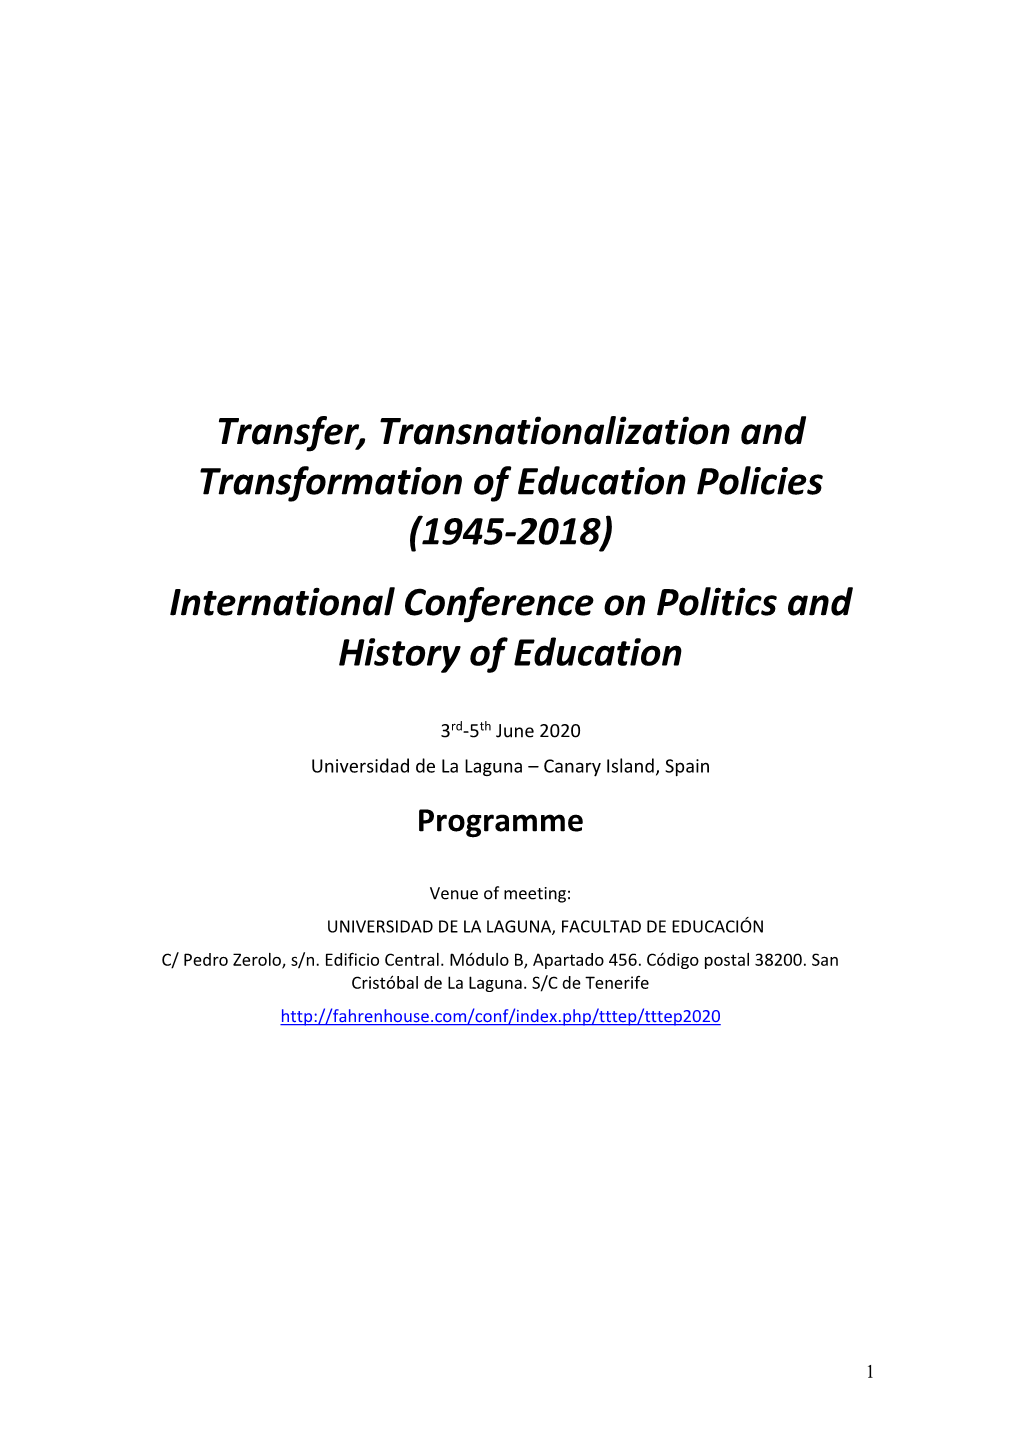 Transfer, Transnationalization and Transformation of Education Policies (1945-2018) International Conference on Politics and History of Education